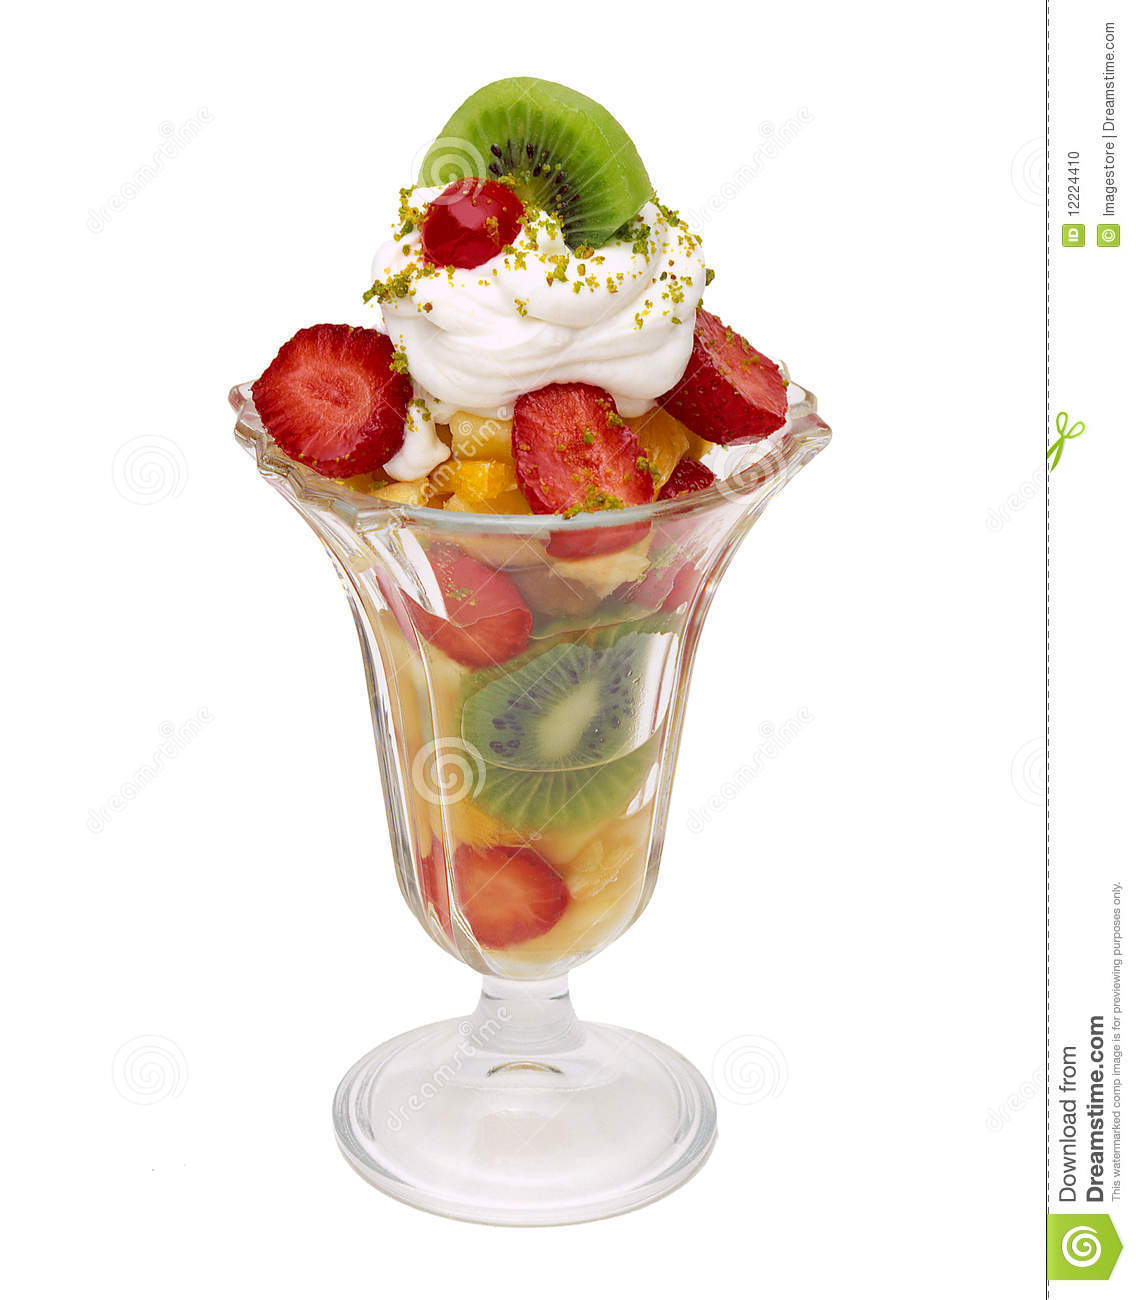 Cup Of Fruit Salad Stock Photo   Image  12224410